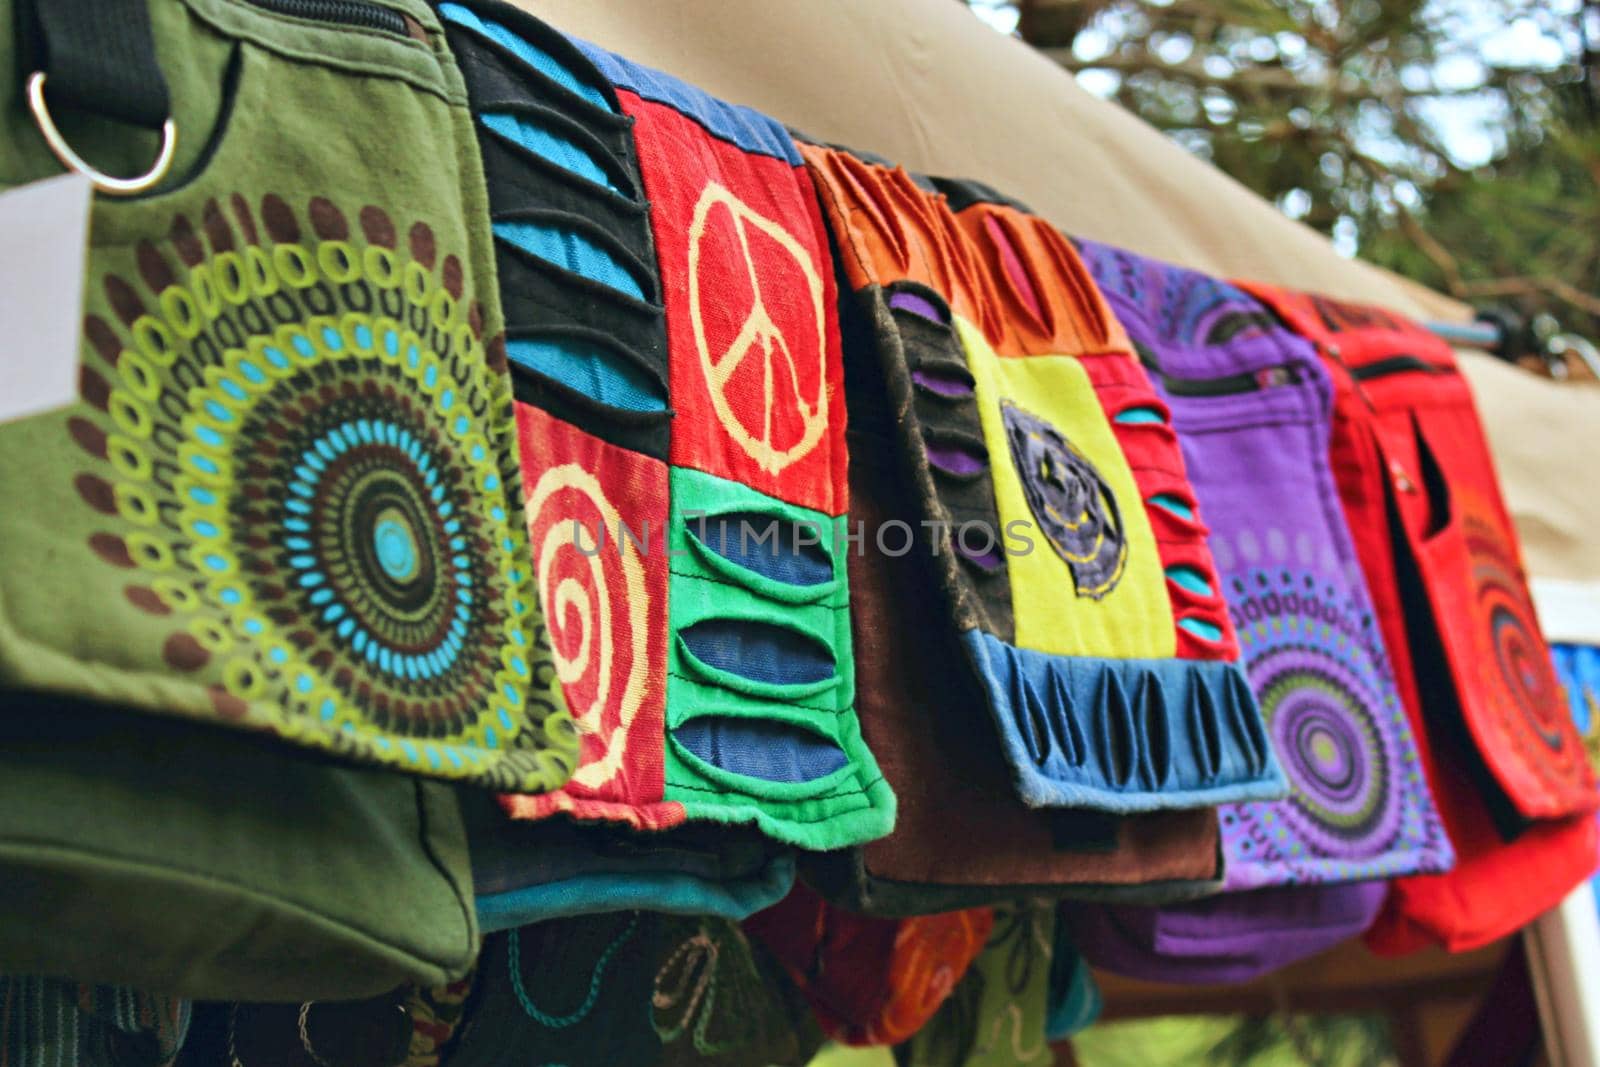 Bohemian bags made from natural materials at a clothes stand in a hippy festival market